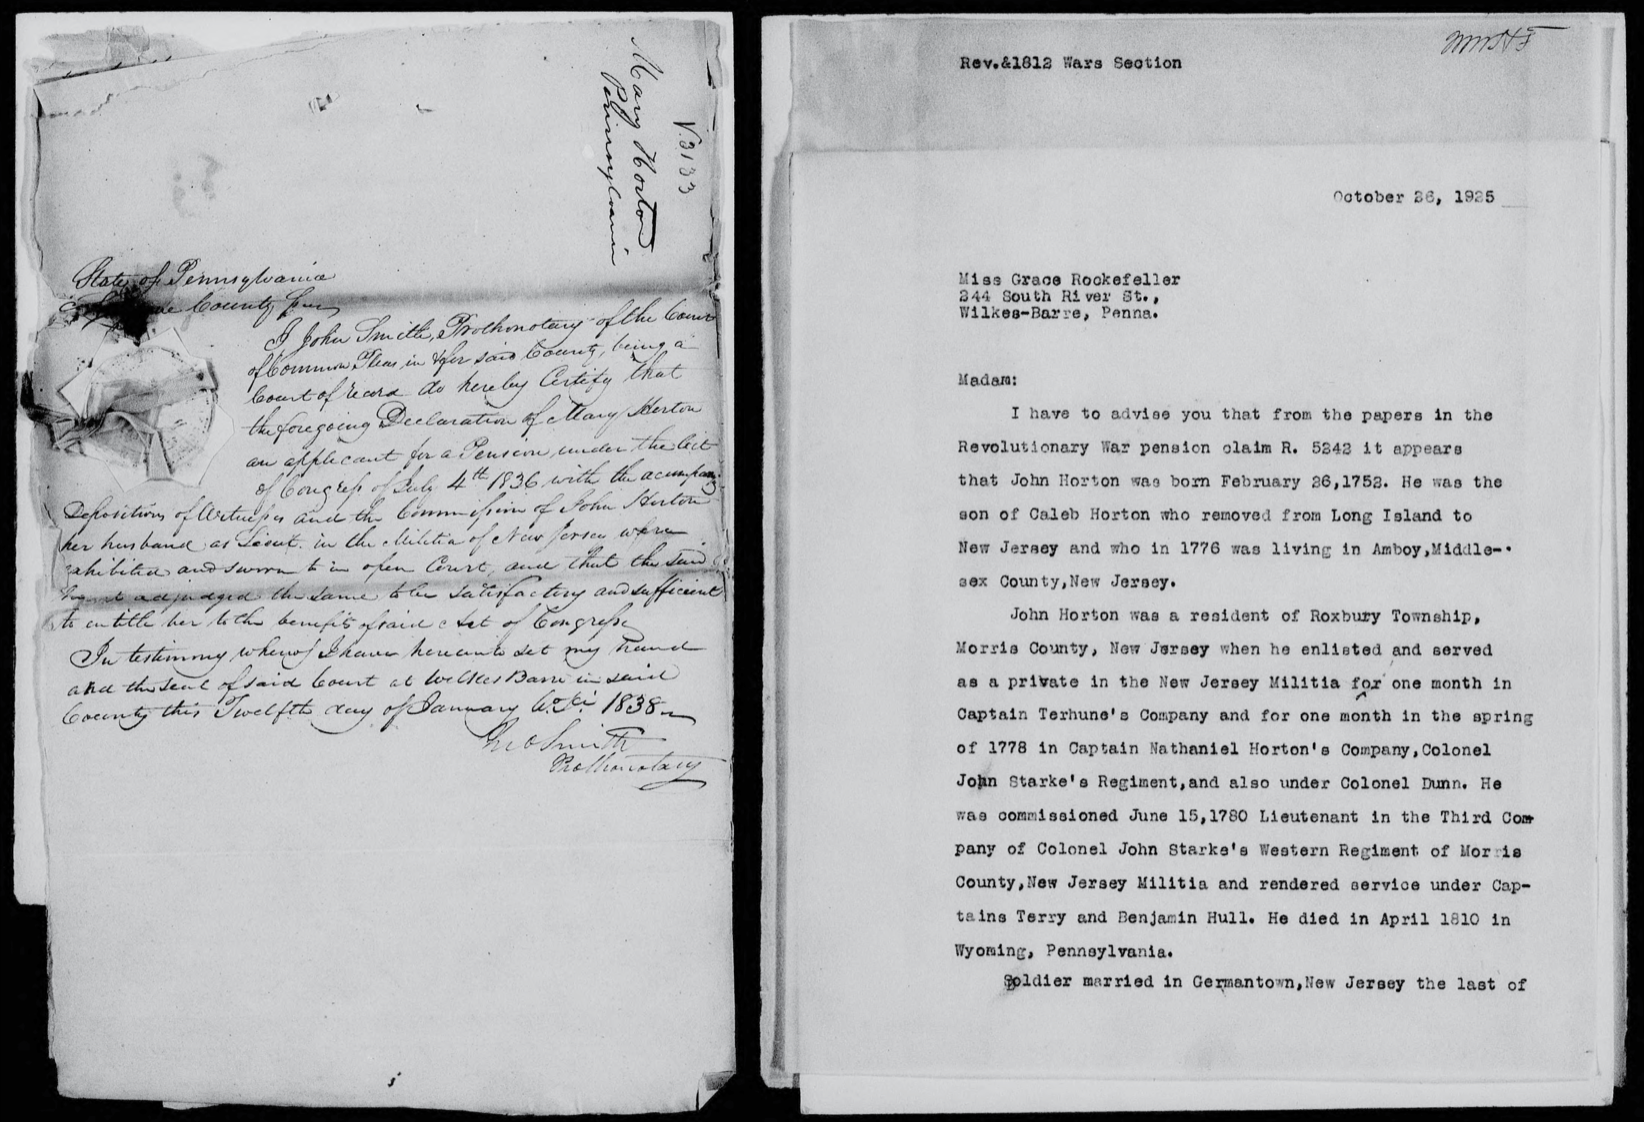 Two historic documents. The page on the left is hand-written in cursive, creased, stained, and hard to read.  The page on the right is neatly typed.